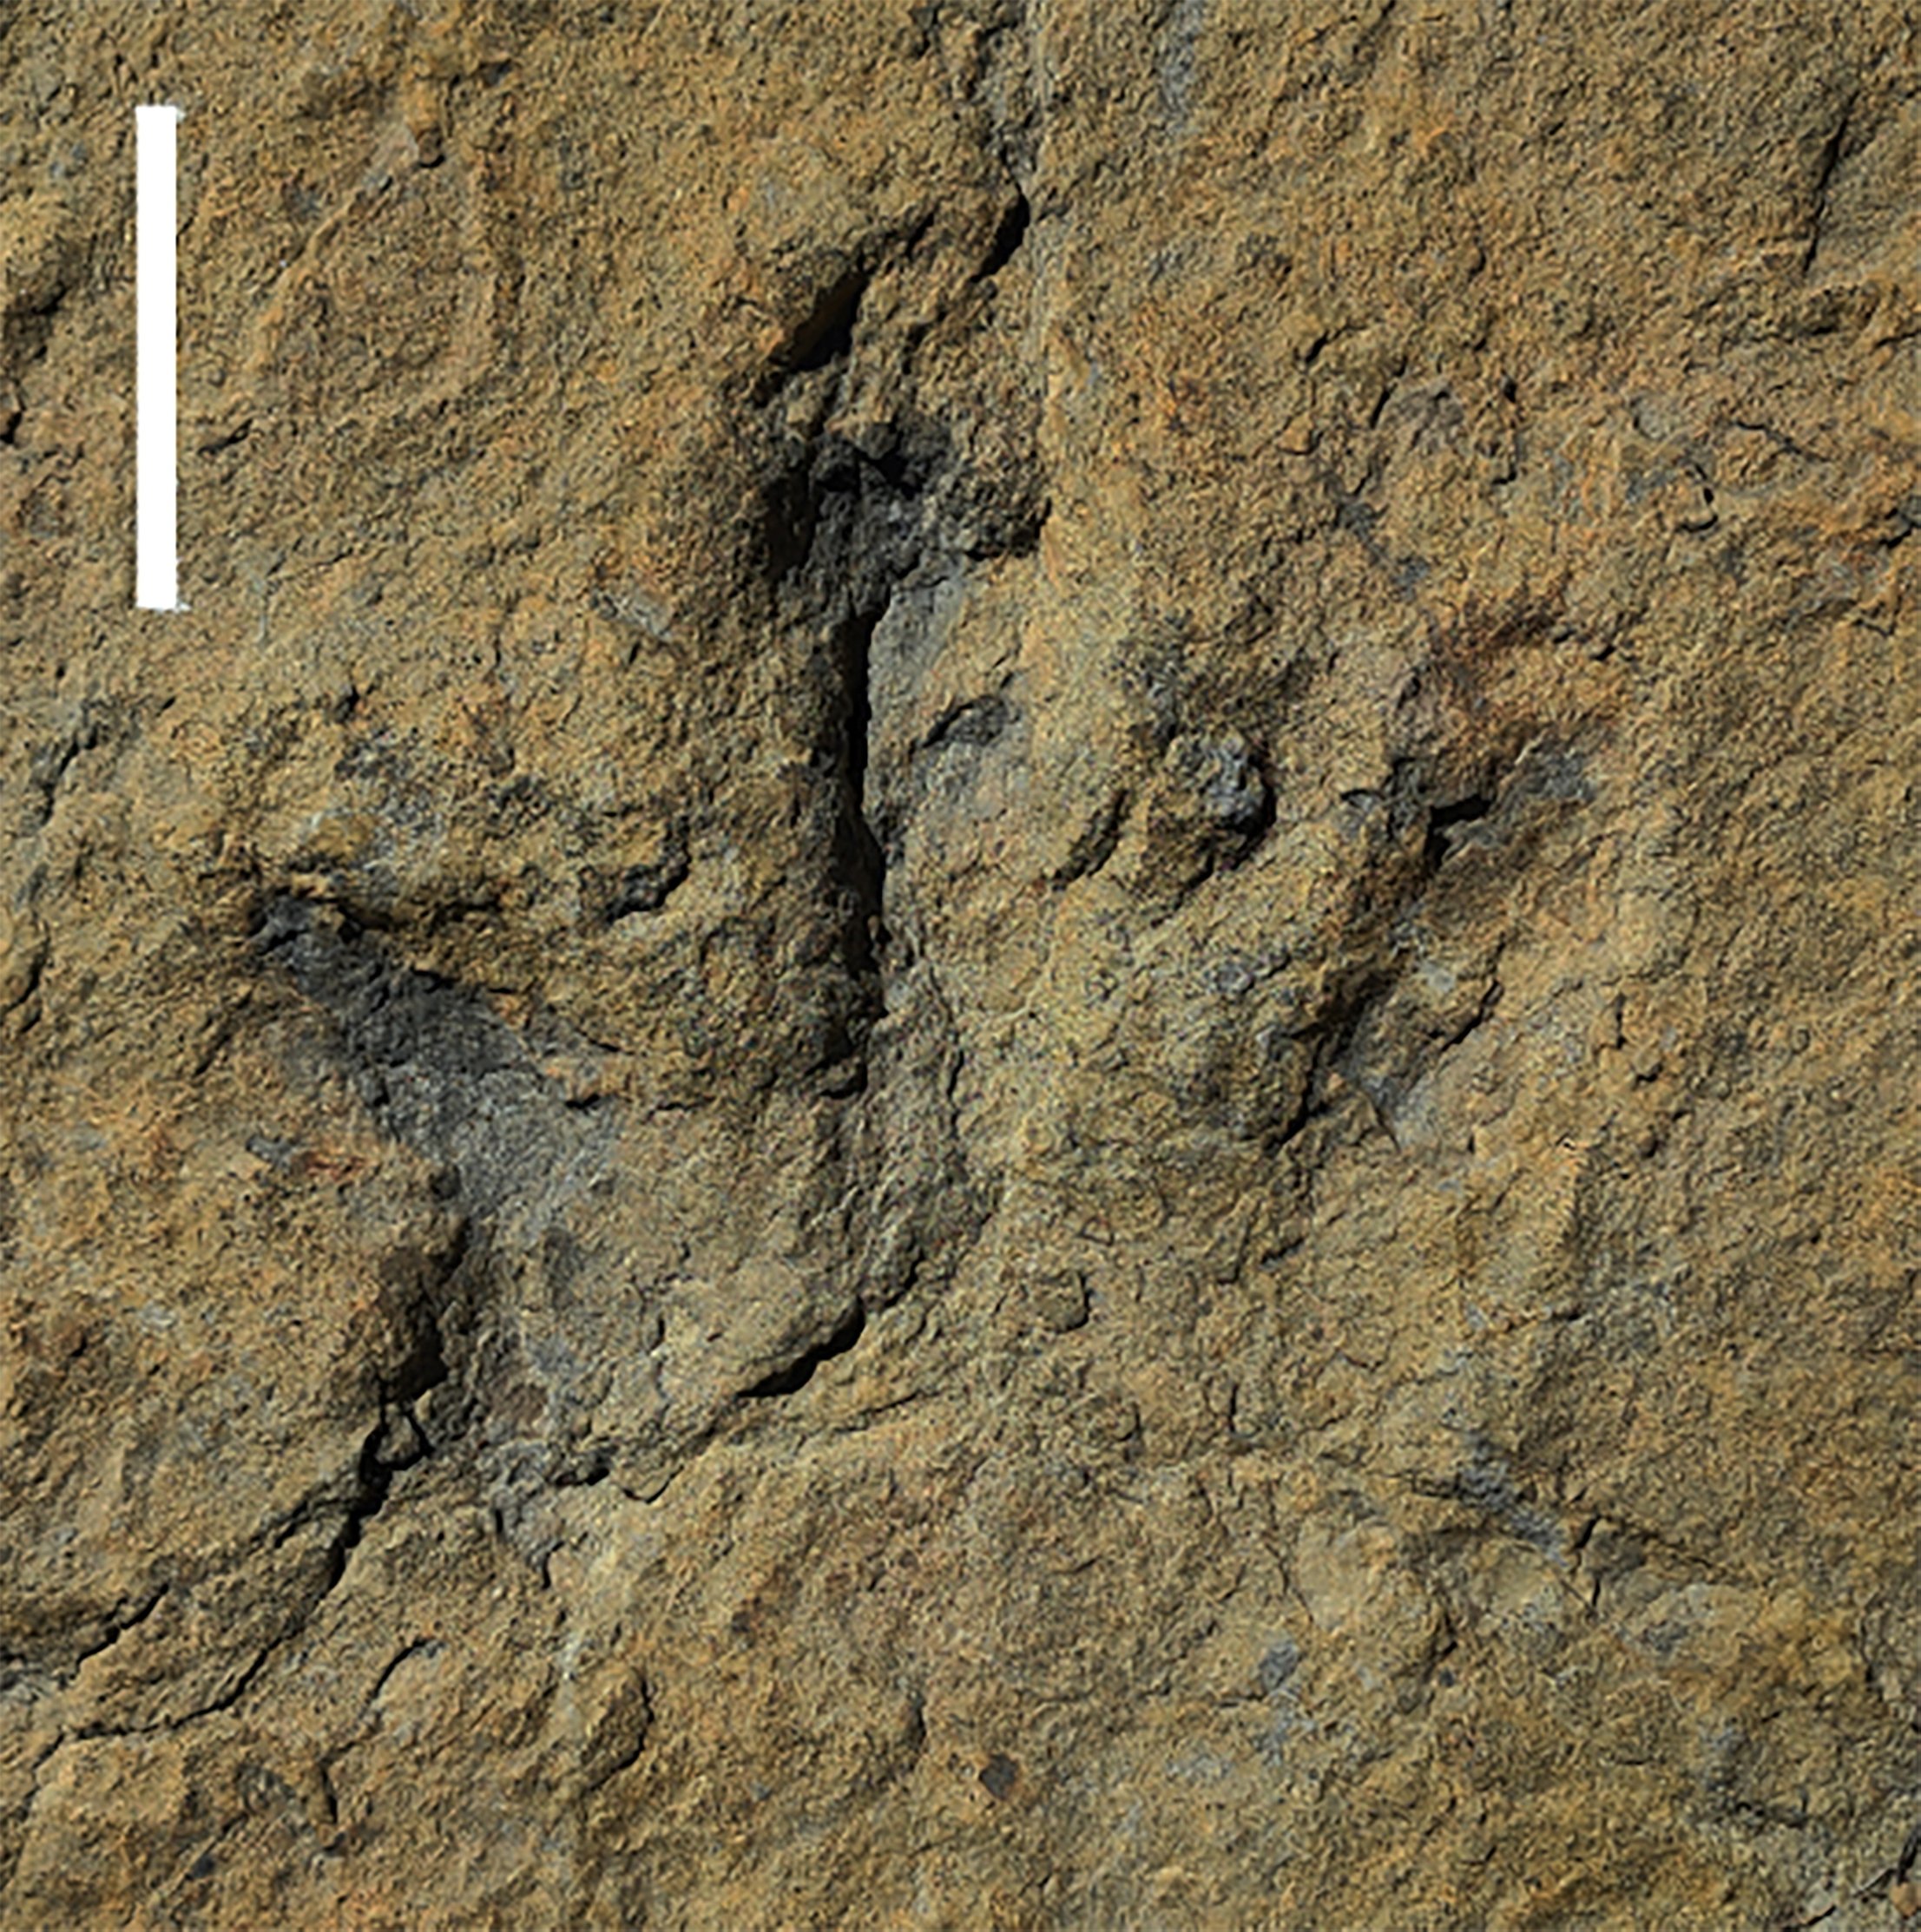 A fossilized dinosaur footprint made about 120 million years ago during the Cretaceous Period from one of two trackways discovered in the La Rioja region in northern Spain, is seen in this undated handout picture. (Pablo Navarro-Lorbes via Reuters)